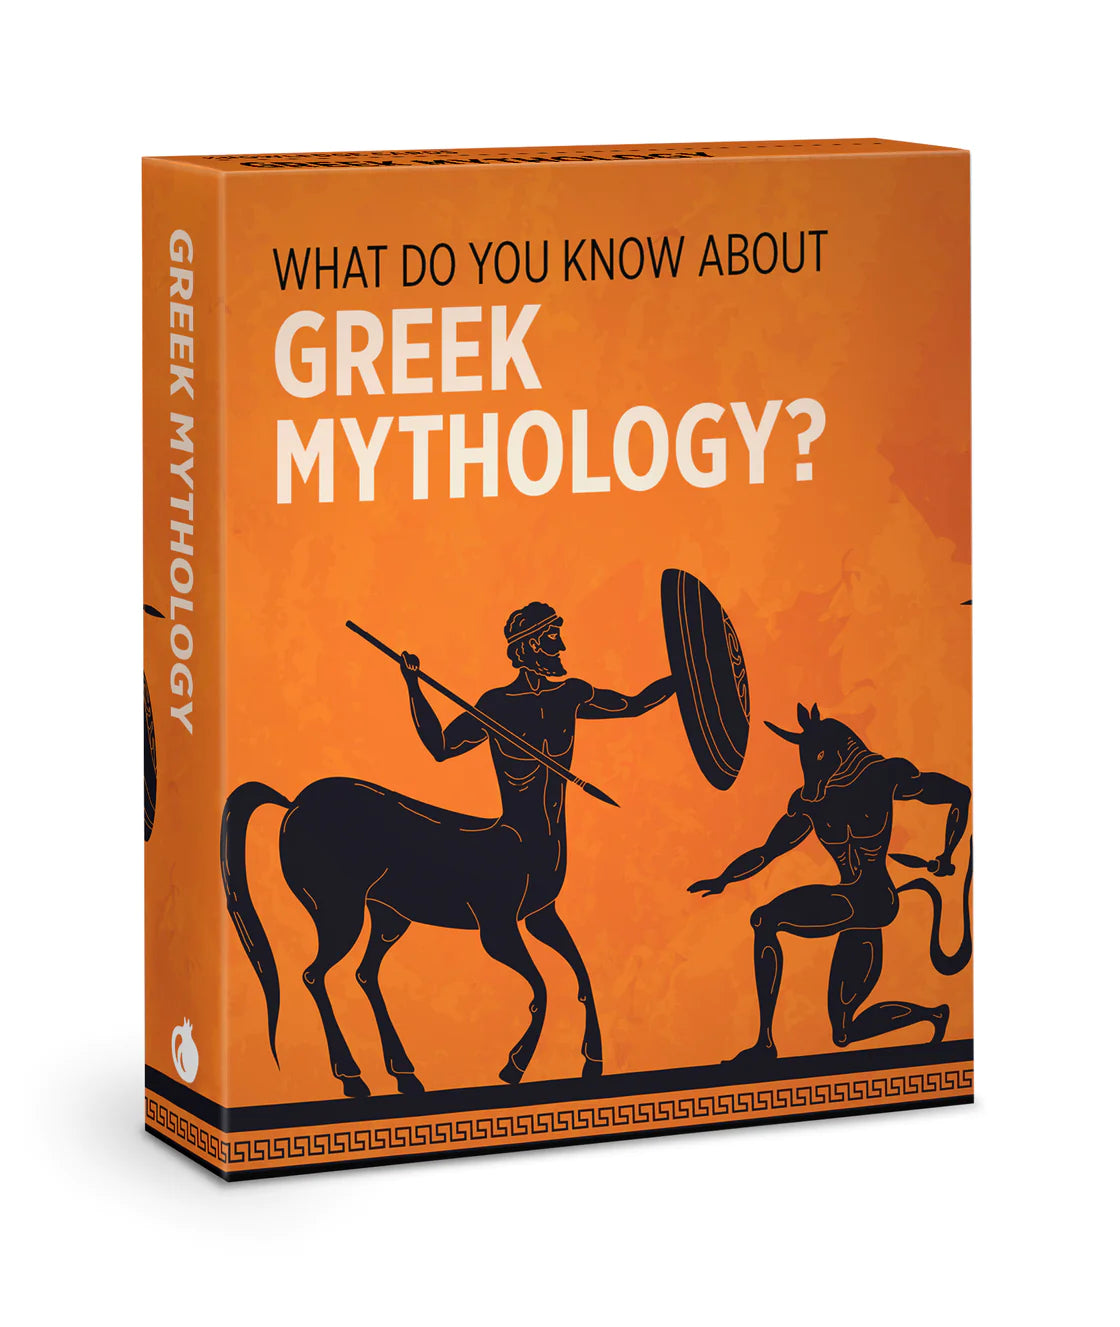 What Do You Know About Greek Mythology? Knowledge Cards